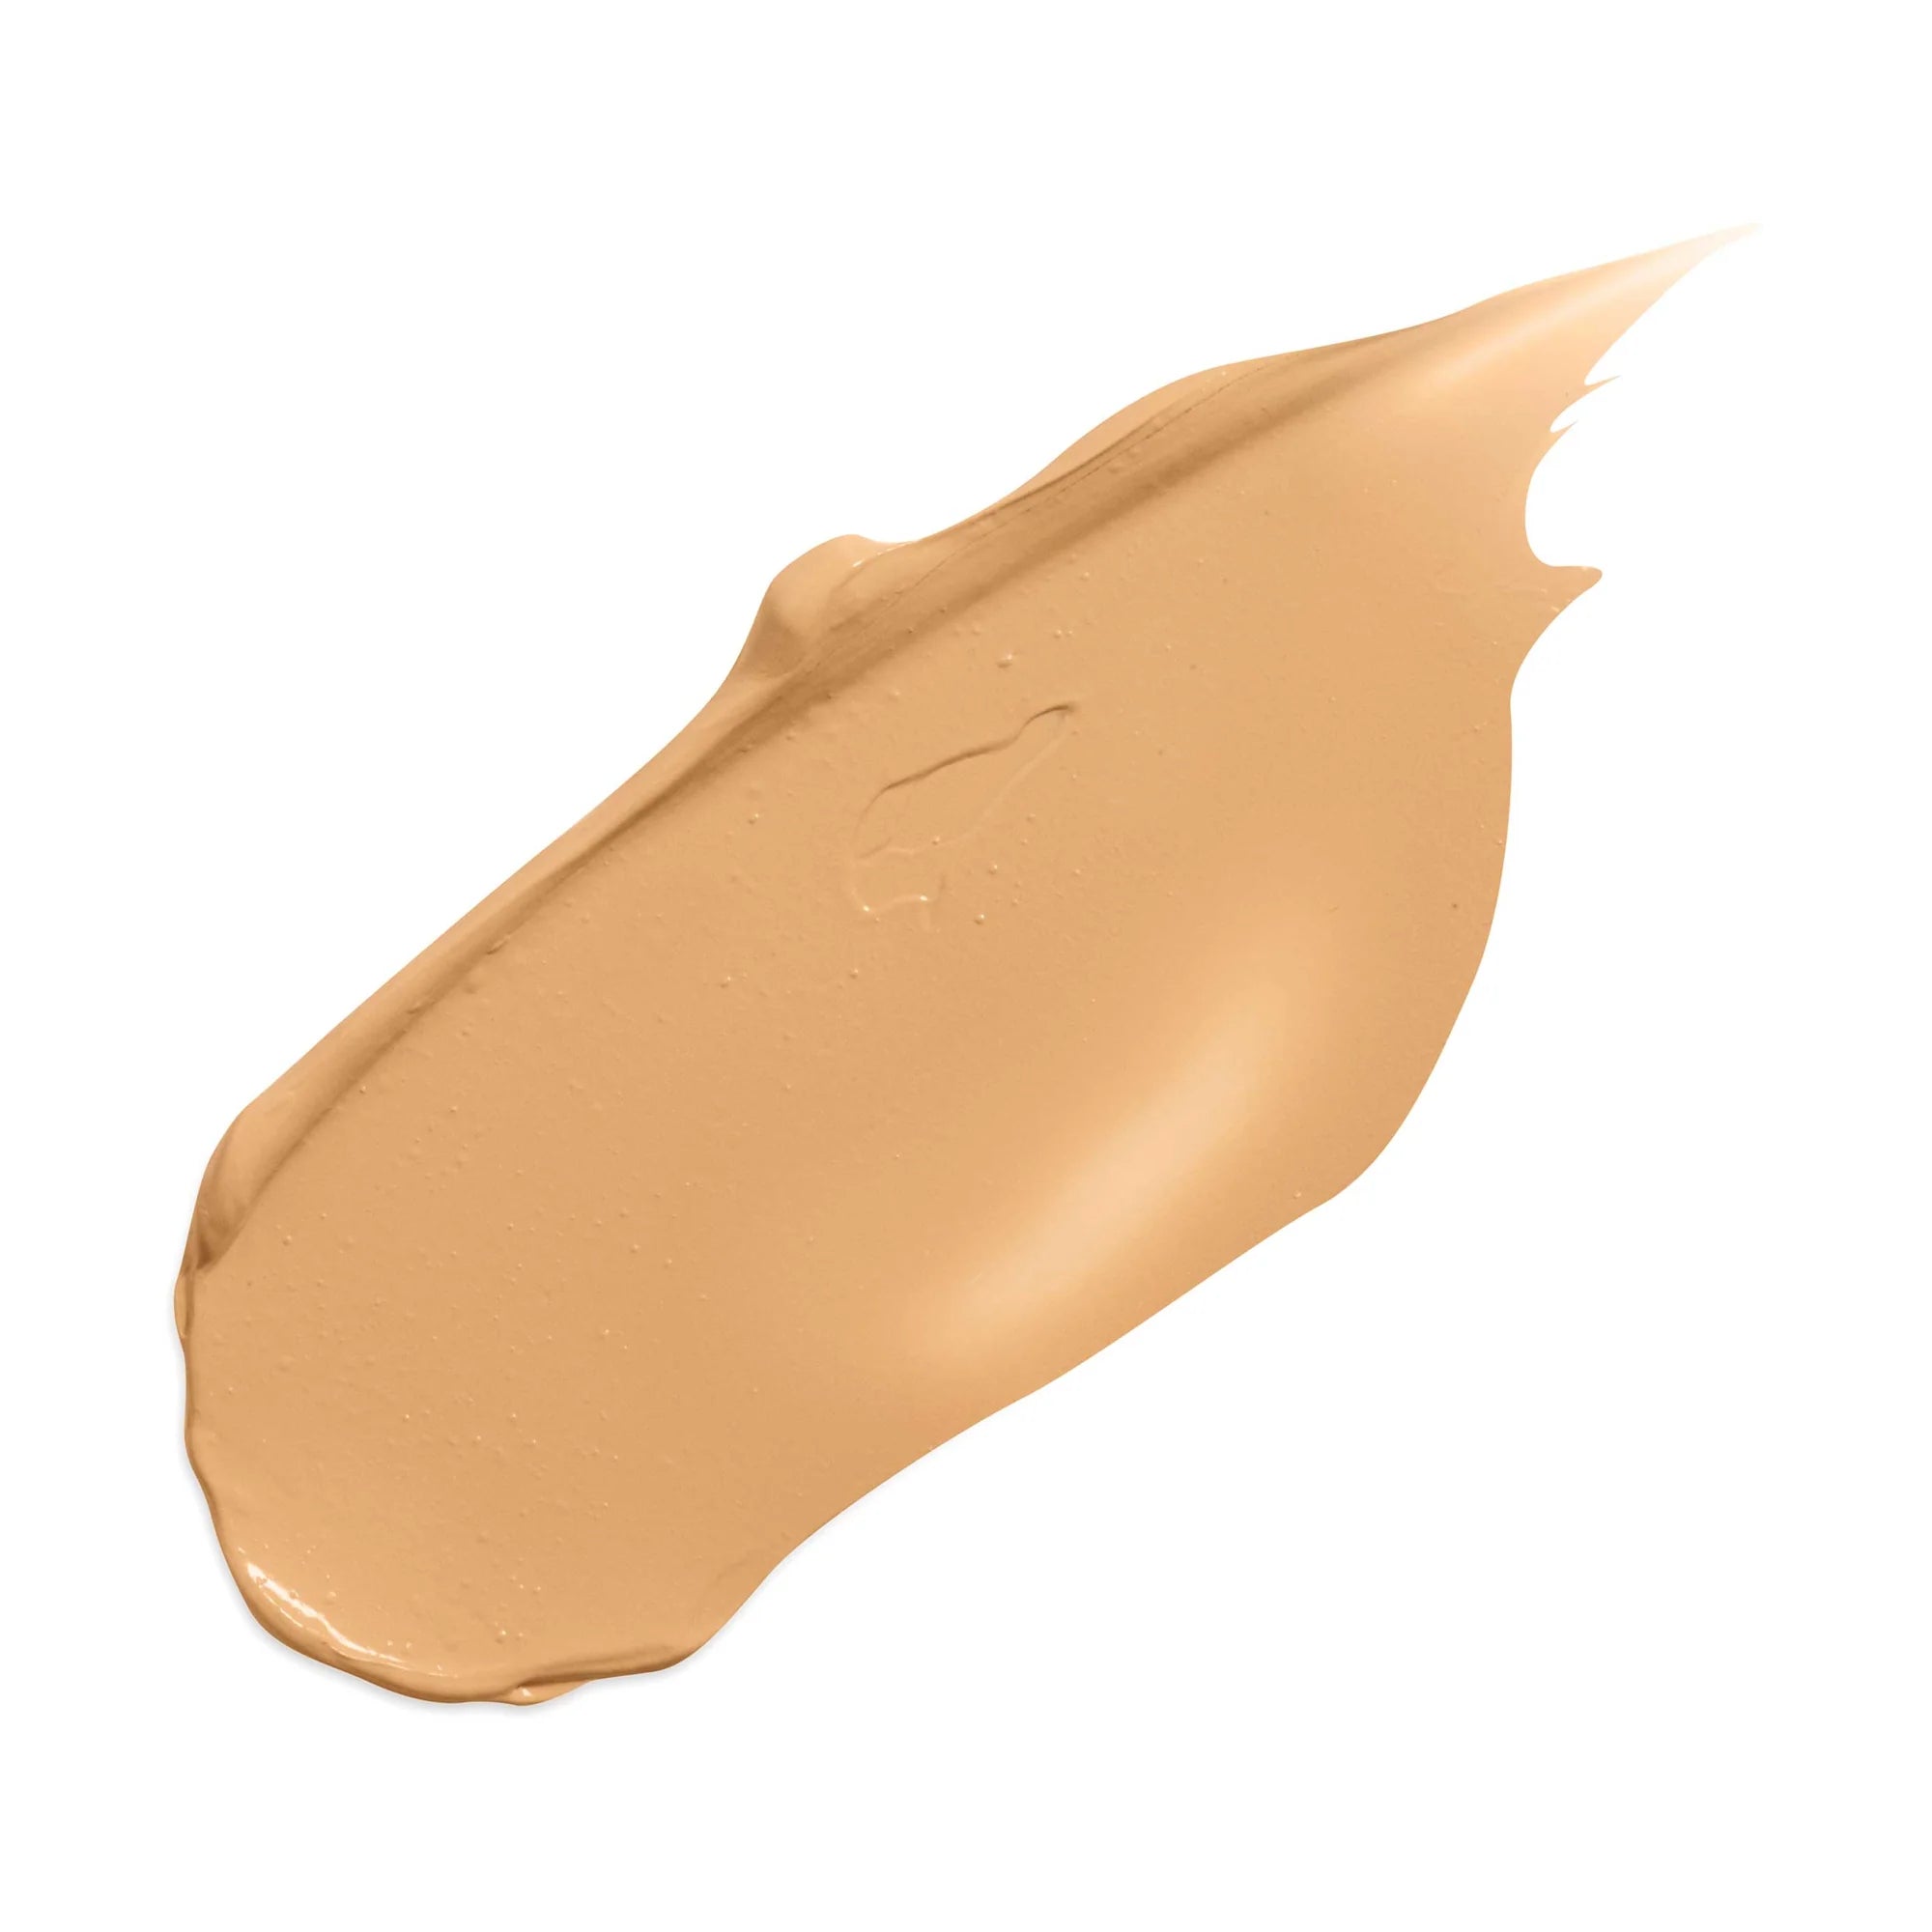 Jane Iredale Disappear Full Coverage Concealer - Medium